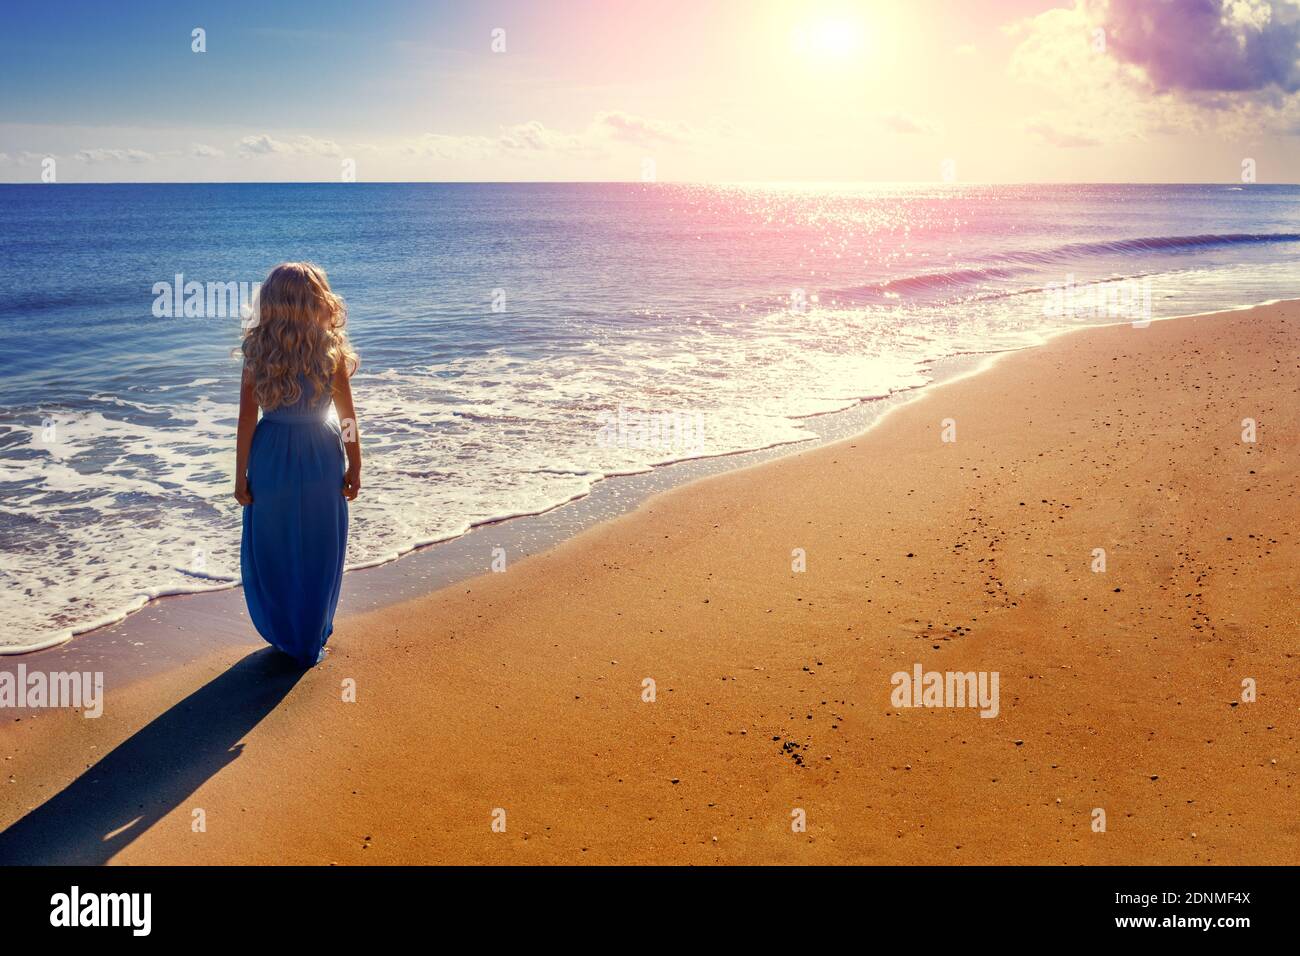 Seascape at sunrise. One woman on the beach. The woman walks along the seashore in a blue long dress Stock Photo